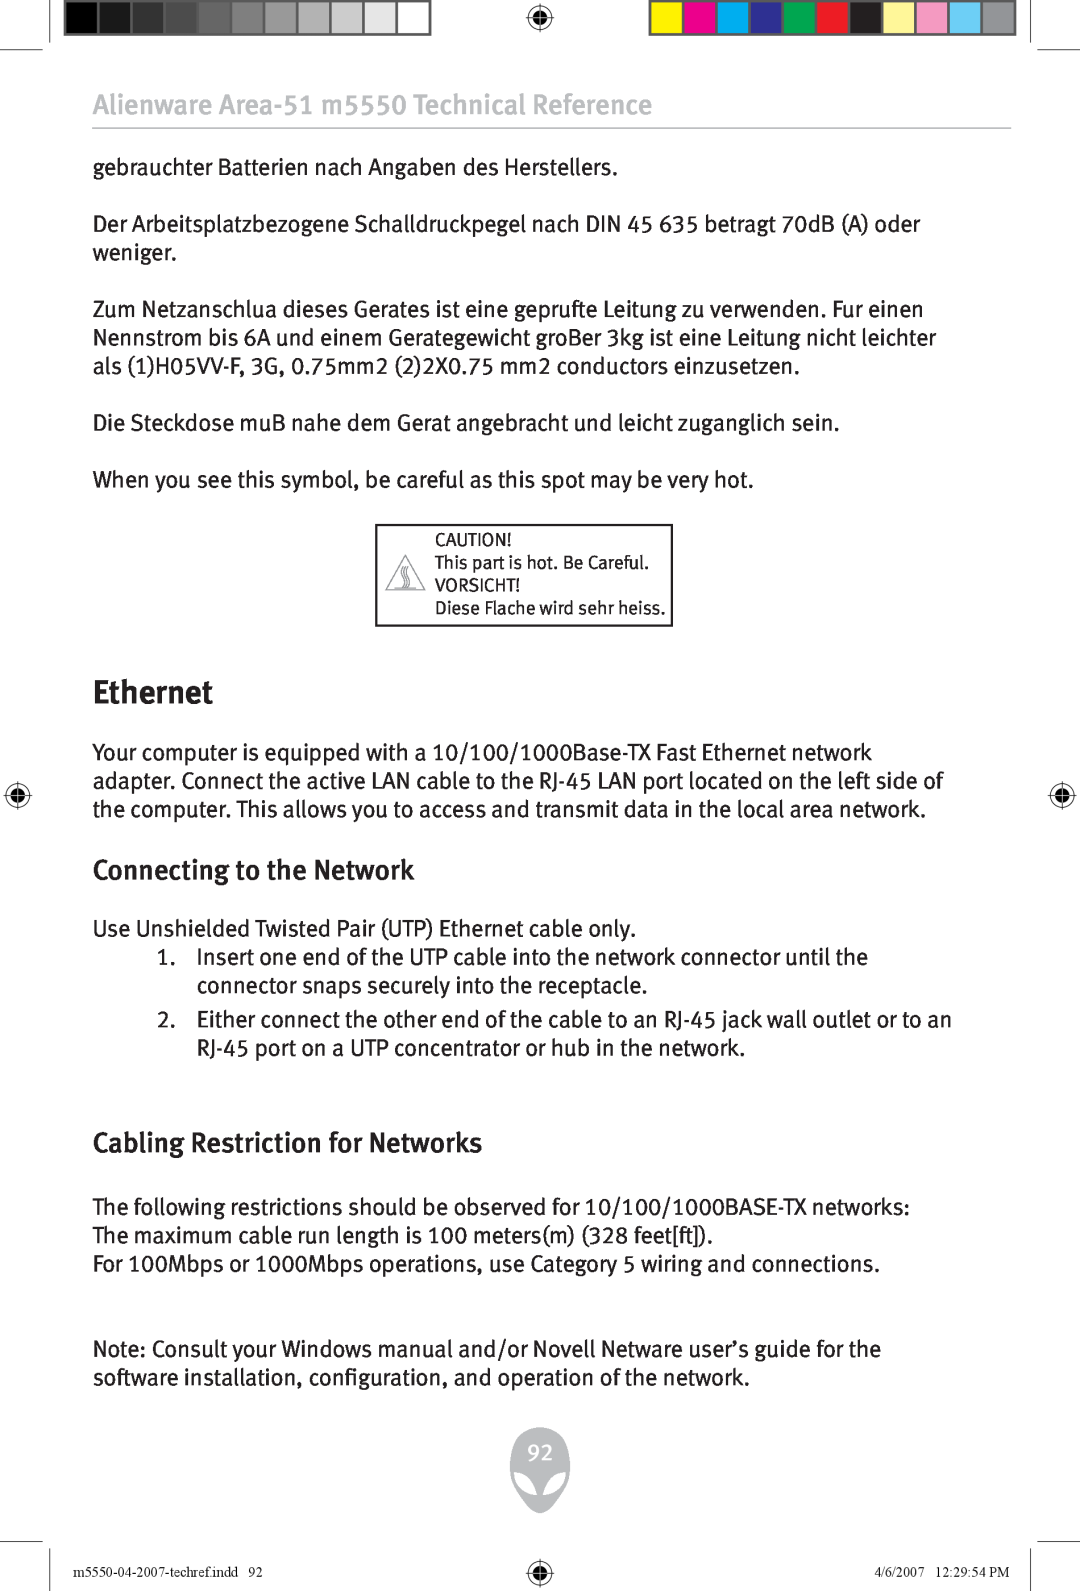 Alienware m5550 user manual Ethernet, Connecting to the Network, Cabling Restriction for Networks 